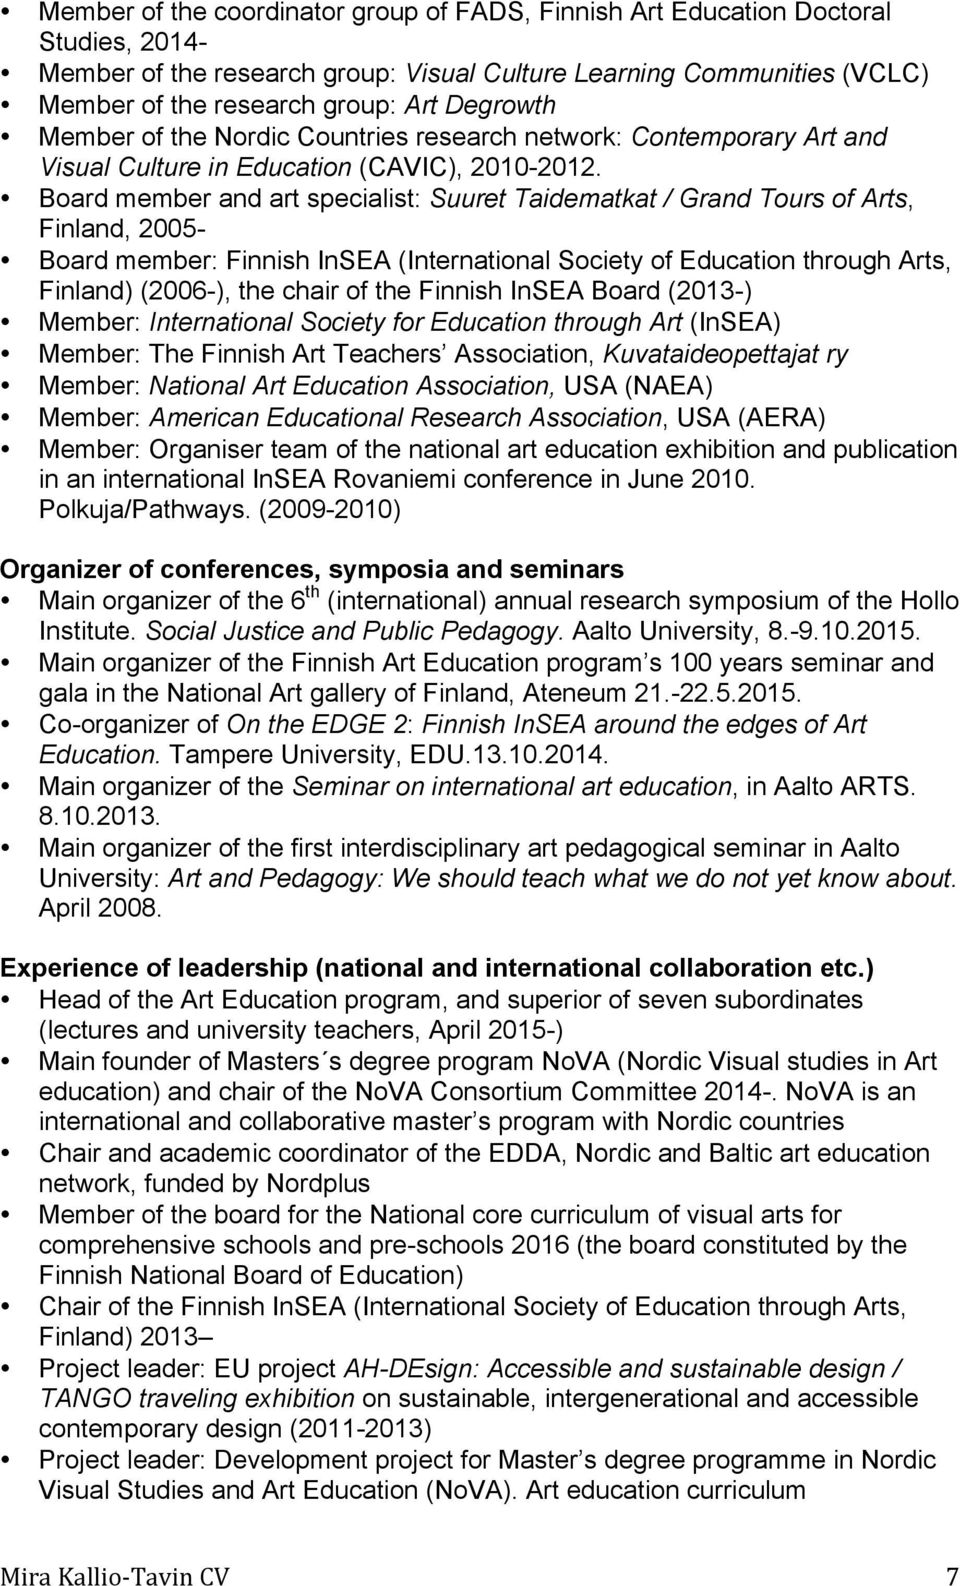 Board member and art specialist: Suuret Taidematkat / Grand Tours of Arts, Finland, 2005- Board member: Finnish InSEA (International Society of Education through Arts, Finland) (2006-), the chair of